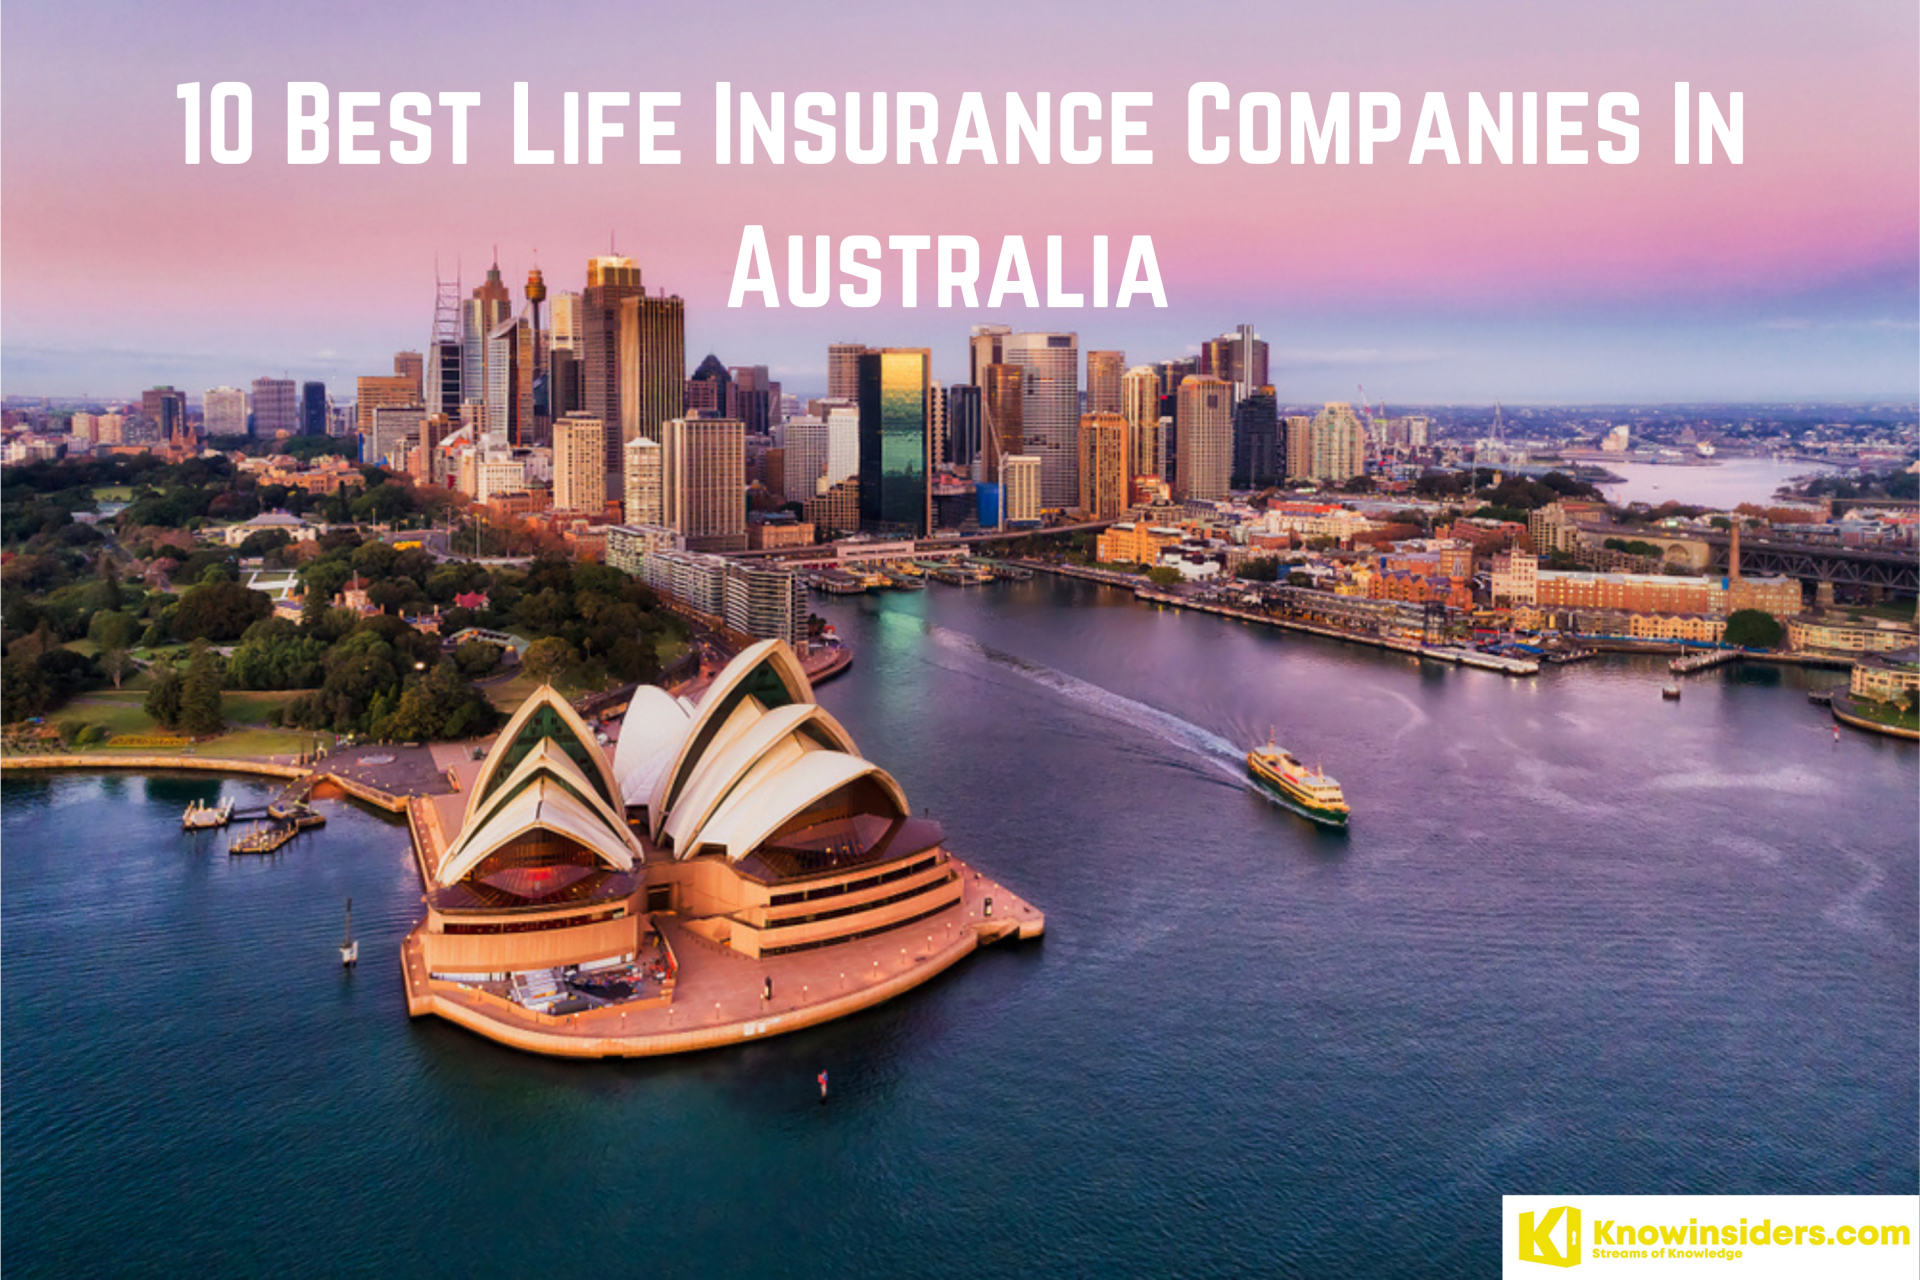 10 Best Life Insurance Companies In Australia: Cheapest Quotes and Good Services